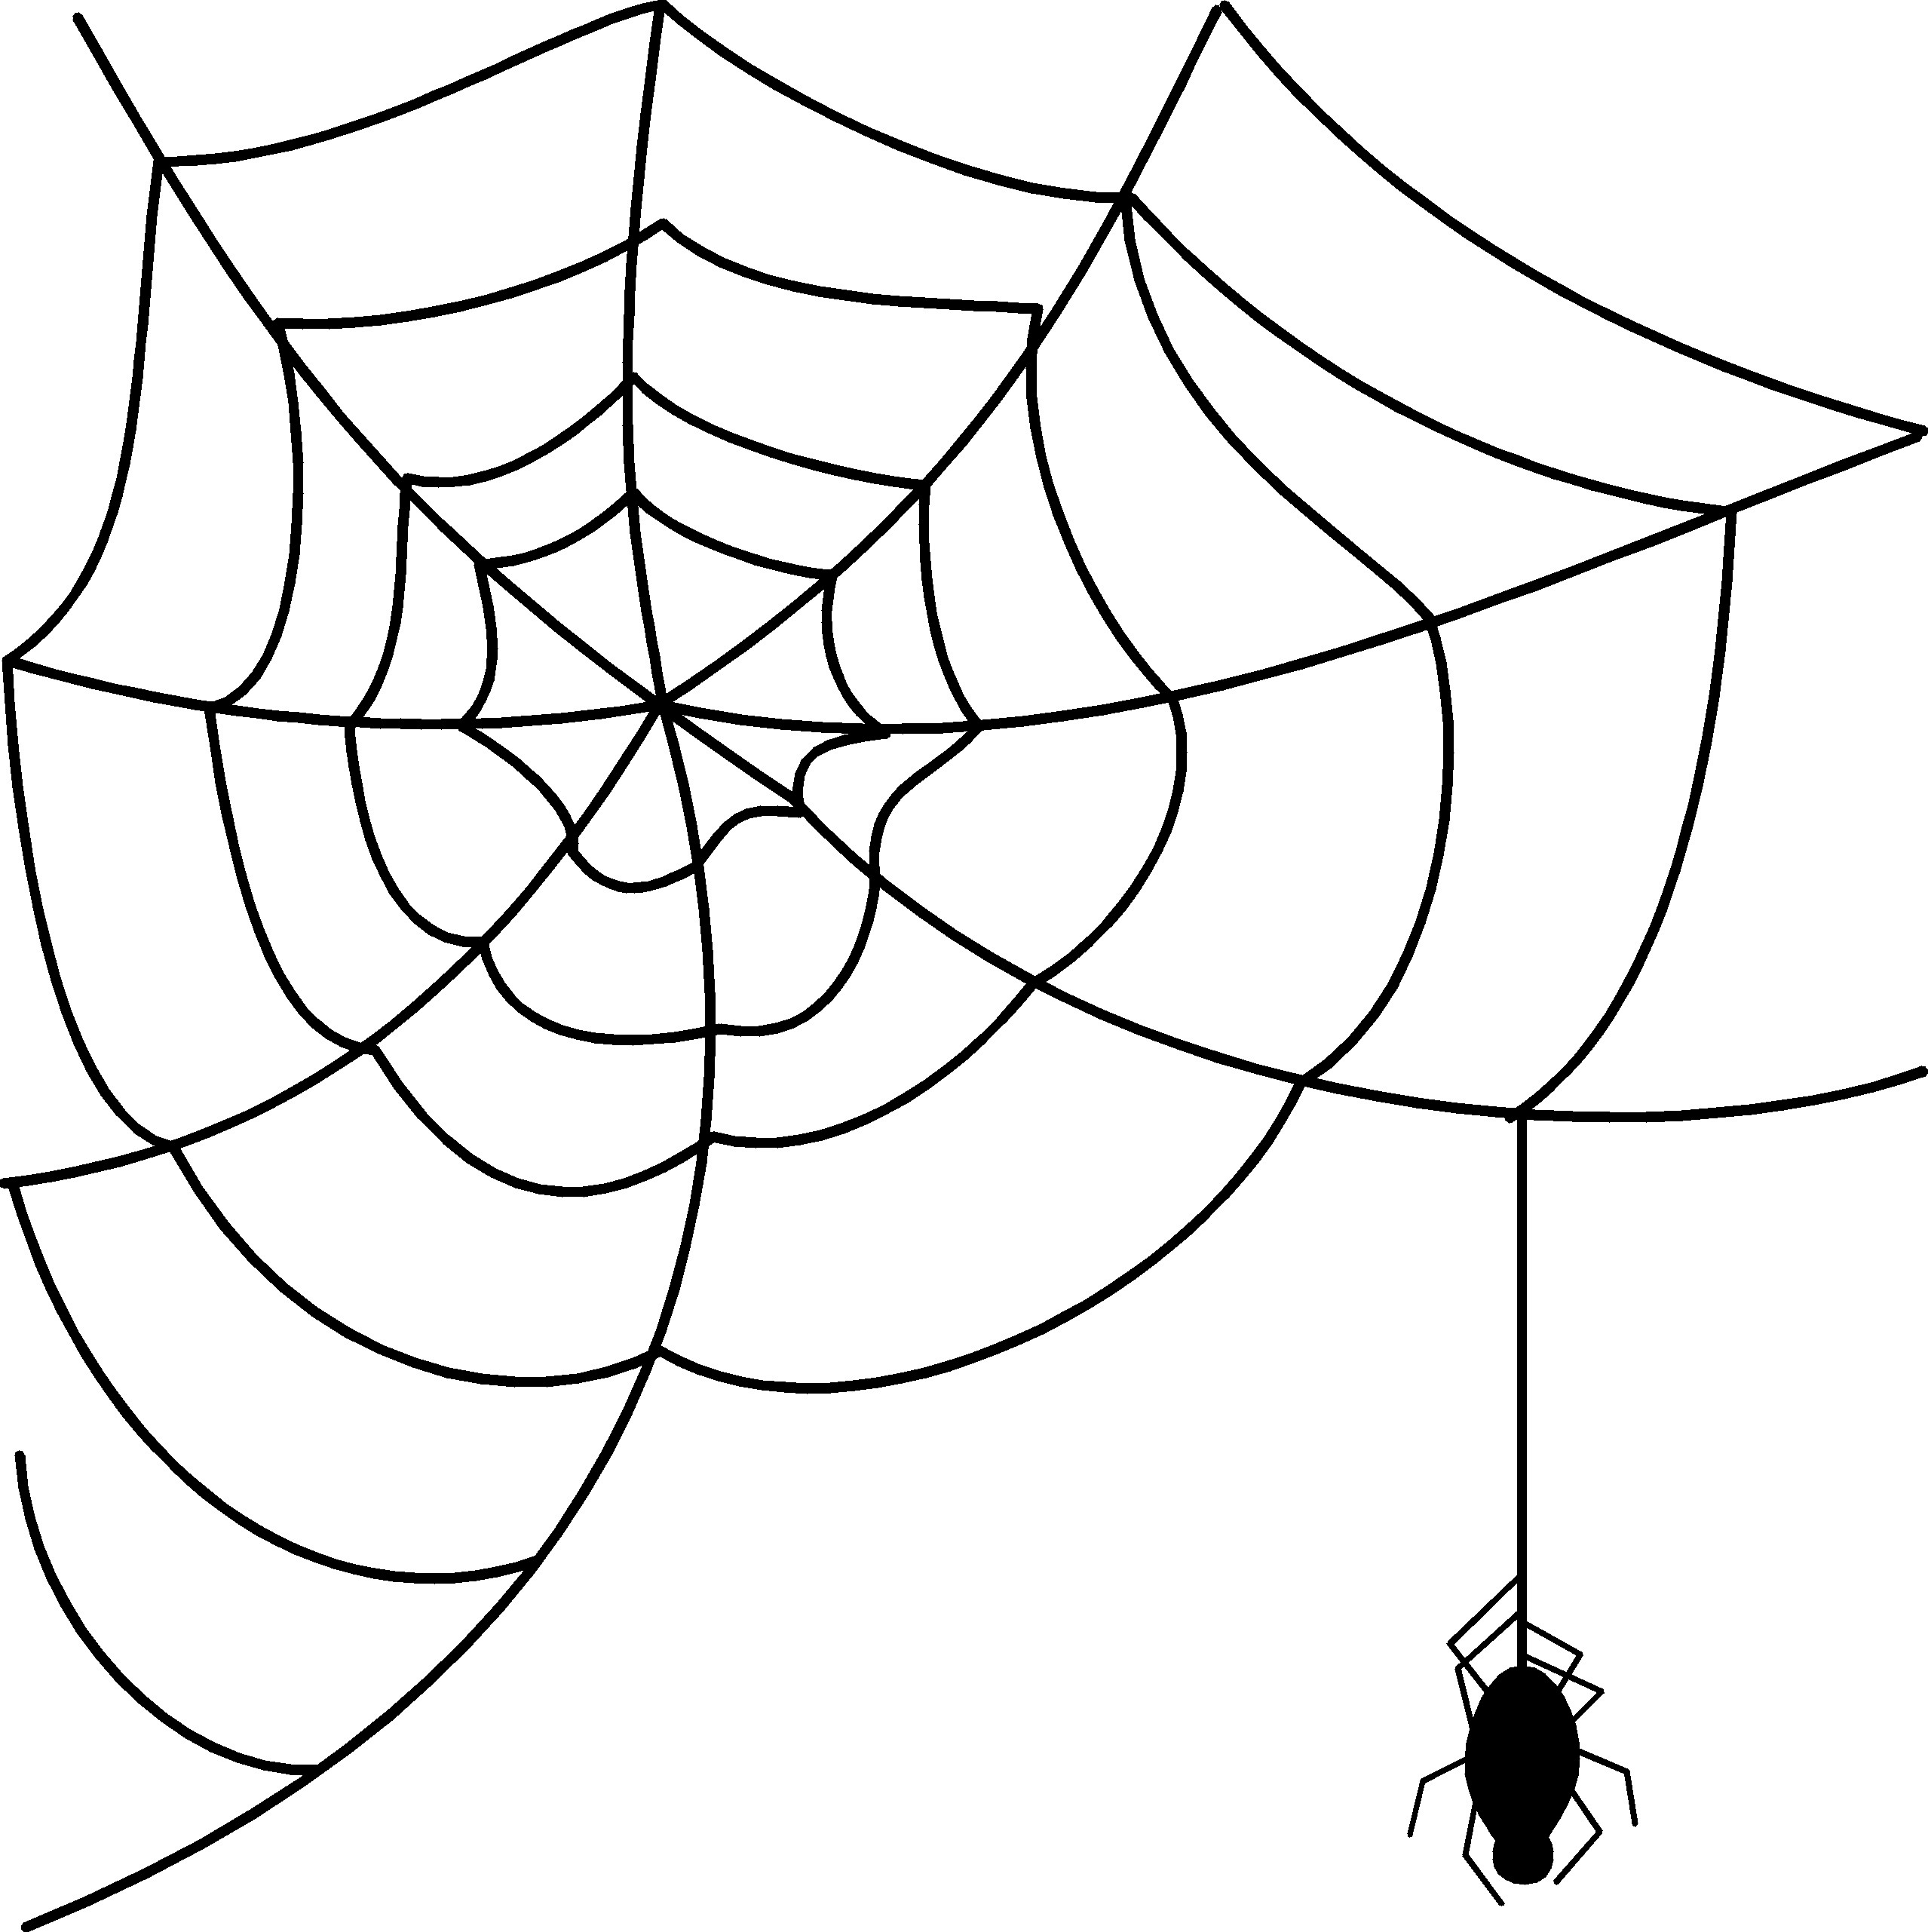 Spider web clipart or silhouette or drawing